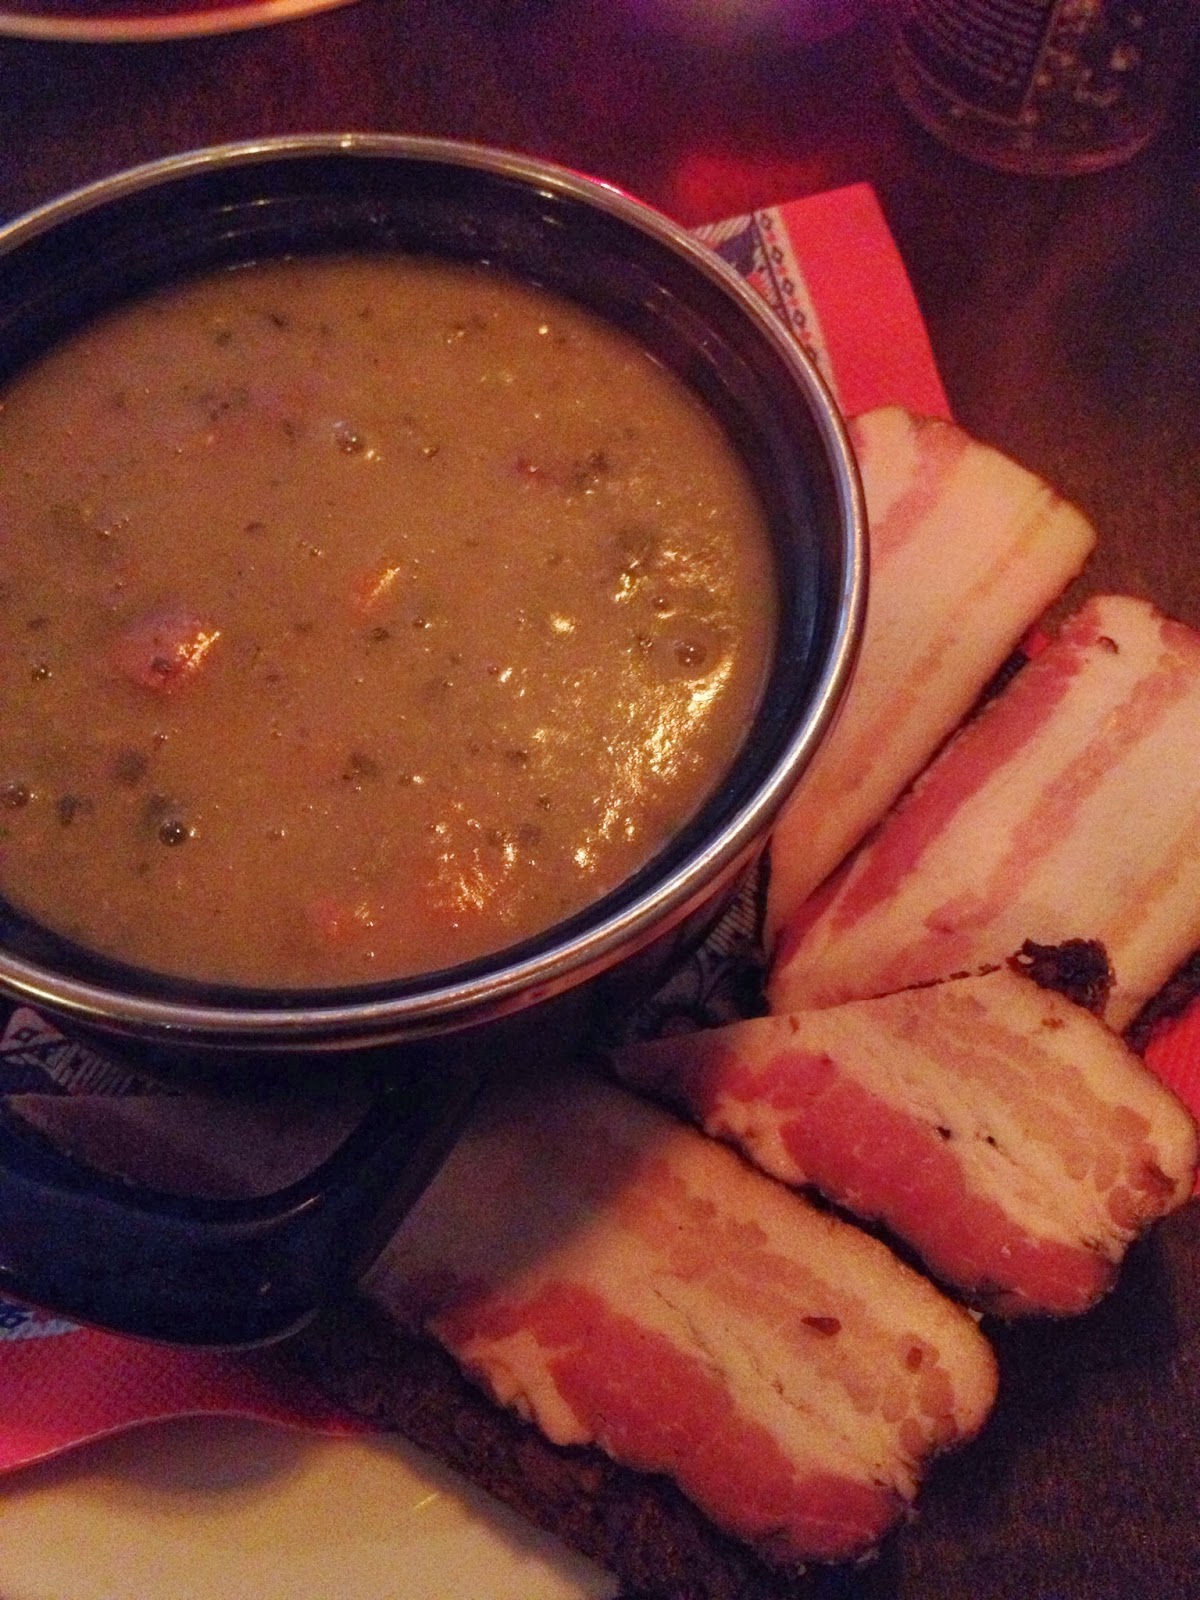 Amsterdam - Pea soup with Dutch bread and bacon